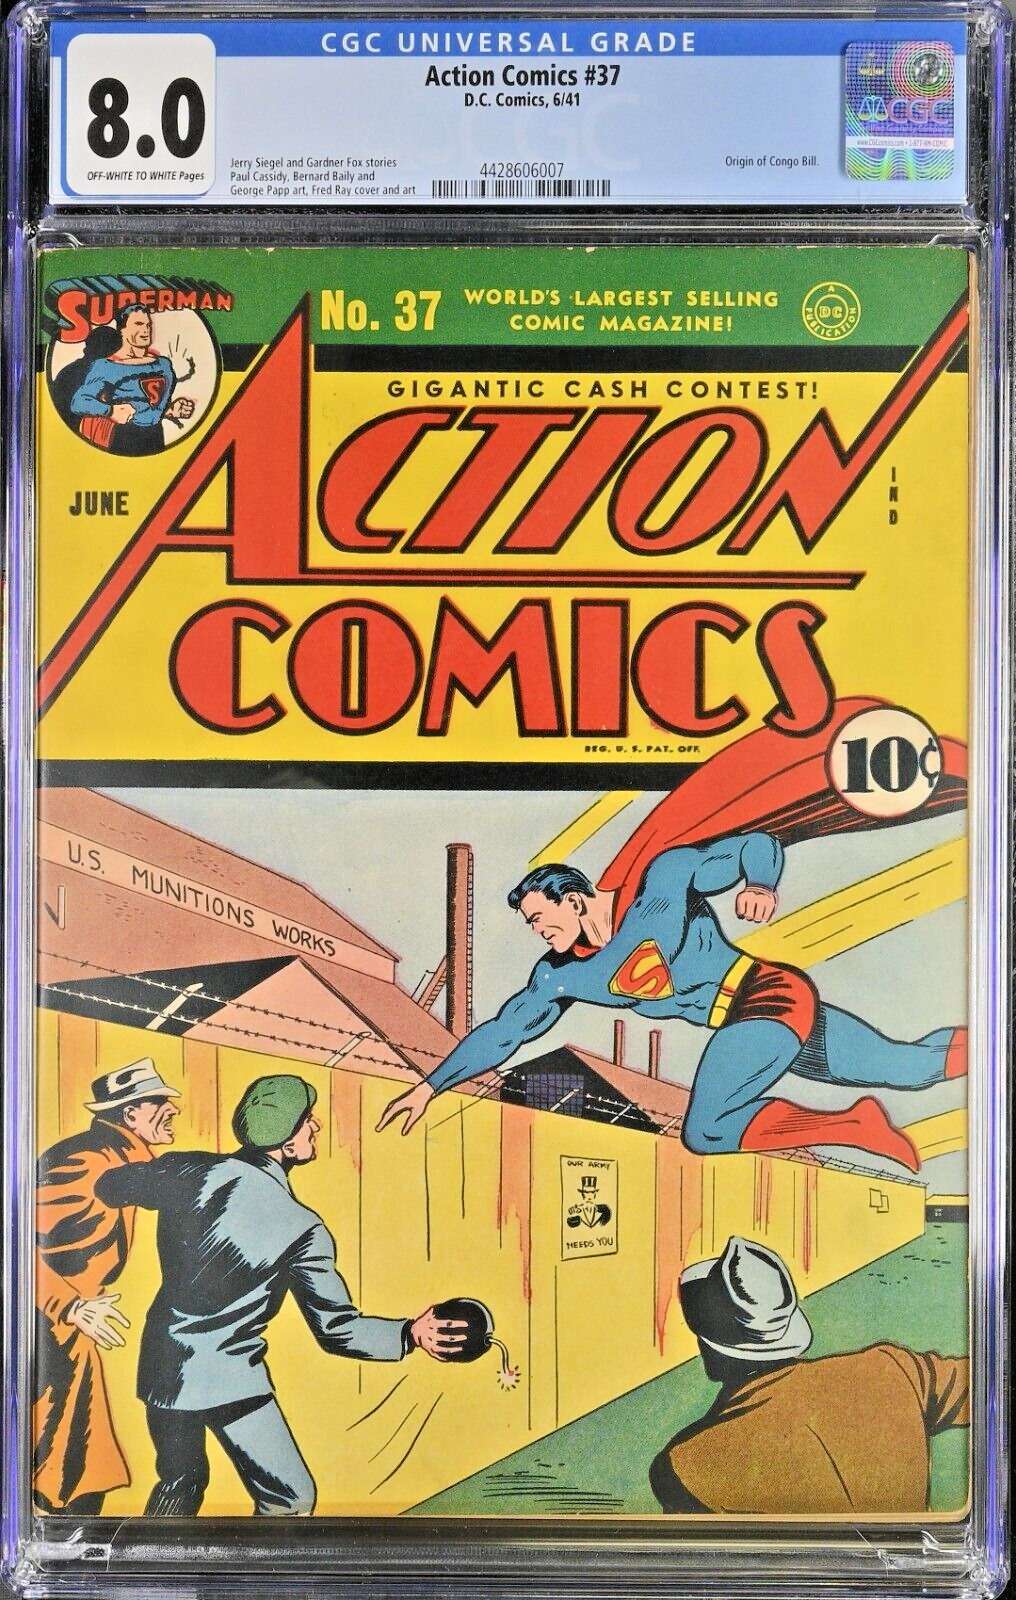 ACTION COMICS #37 CGC VF 8.0 (D.C. 1941) 4TH HIGHEST GRADE ONLY 4 BOOKS HIGHER